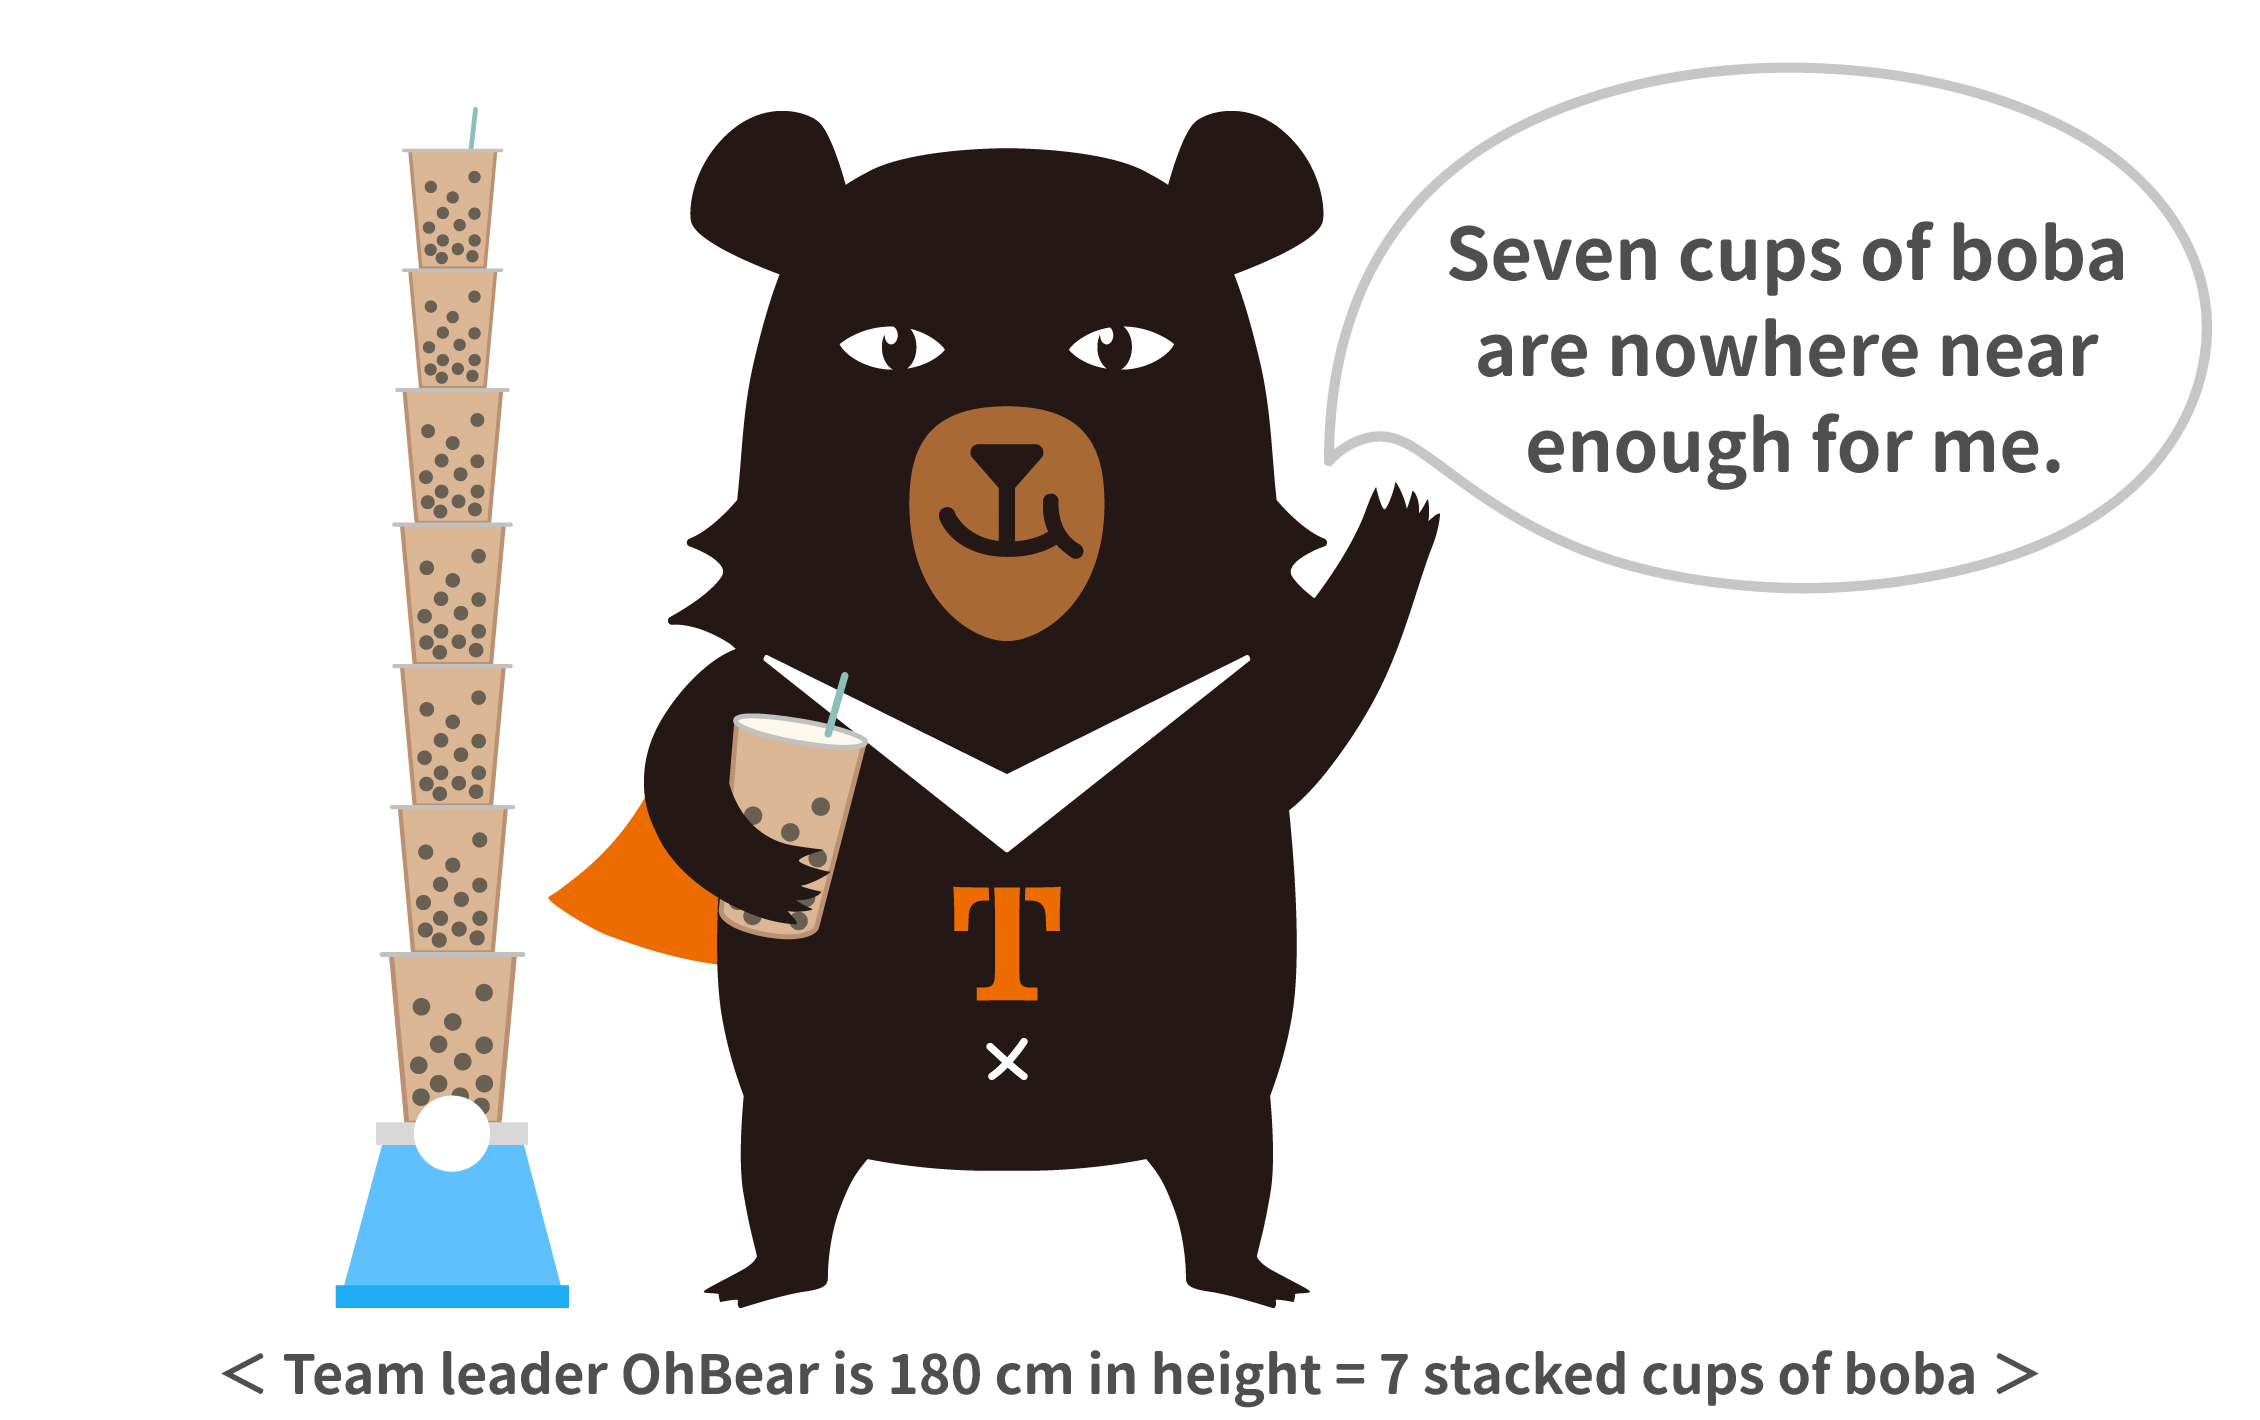 Seven cups of boba are nowhere near enough for me.
<Team leader OhBear is 180 cm in height = 7 stacked cups of boba>